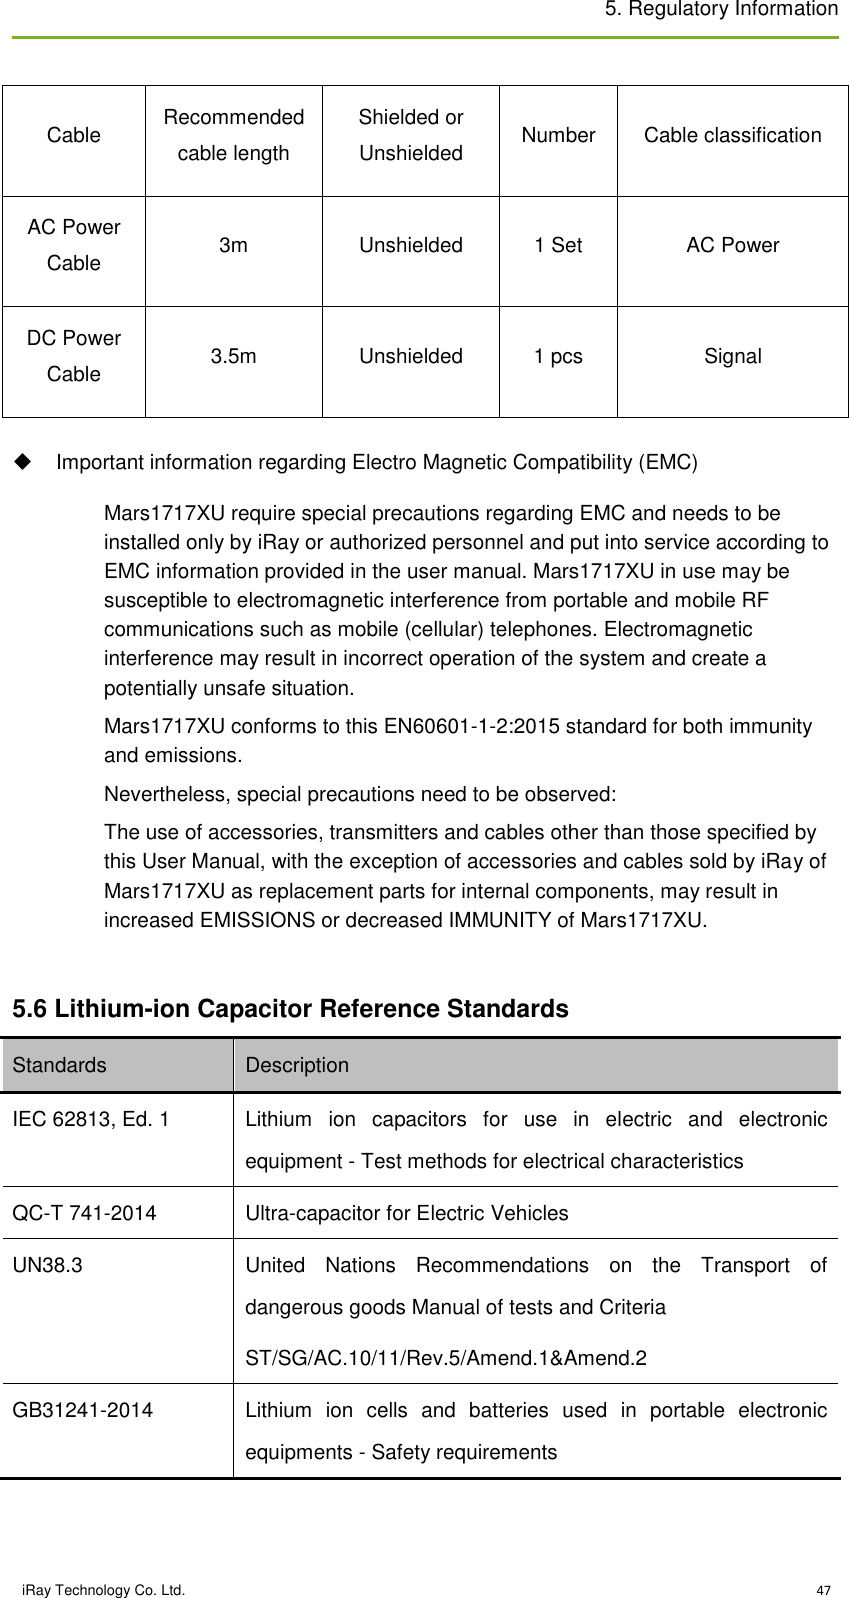 5. Regulatory Information    iRay Technology Co. Ltd.                                                                                                                                                                          47 Cable Recommended cable length Shielded or Unshielded Number Cable classification AC Power Cable 3m Unshielded 1 Set AC Power DC Power Cable 3.5m Unshielded 1 pcs Signal   Important information regarding Electro Magnetic Compatibility (EMC) Mars1717XU require special precautions regarding EMC and needs to be installed only by iRay or authorized personnel and put into service according to EMC information provided in the user manual. Mars1717XU in use may be susceptible to electromagnetic interference from portable and mobile RF communications such as mobile (cellular) telephones. Electromagnetic interference may result in incorrect operation of the system and create a potentially unsafe situation. Mars1717XU conforms to this EN60601-1-2:2015 standard for both immunity and emissions. Nevertheless, special precautions need to be observed: The use of accessories, transmitters and cables other than those specified by this User Manual, with the exception of accessories and cables sold by iRay of Mars1717XU as replacement parts for internal components, may result in increased EMISSIONS or decreased IMMUNITY of Mars1717XU.  5.6 Lithium-ion Capacitor Reference Standards Standards Description IEC 62813, Ed. 1 Lithium  ion  capacitors  for  use  in  electric  and  electronic equipment - Test methods for electrical characteristics QC-T 741-2014 Ultra-capacitor for Electric Vehicles UN38.3 United  Nations  Recommendations  on  the  Transport  of dangerous goods Manual of tests and Criteria ST/SG/AC.10/11/Rev.5/Amend.1&amp;Amend.2 GB31241-2014 Lithium  ion  cells  and  batteries  used  in  portable  electronic equipments - Safety requirements  